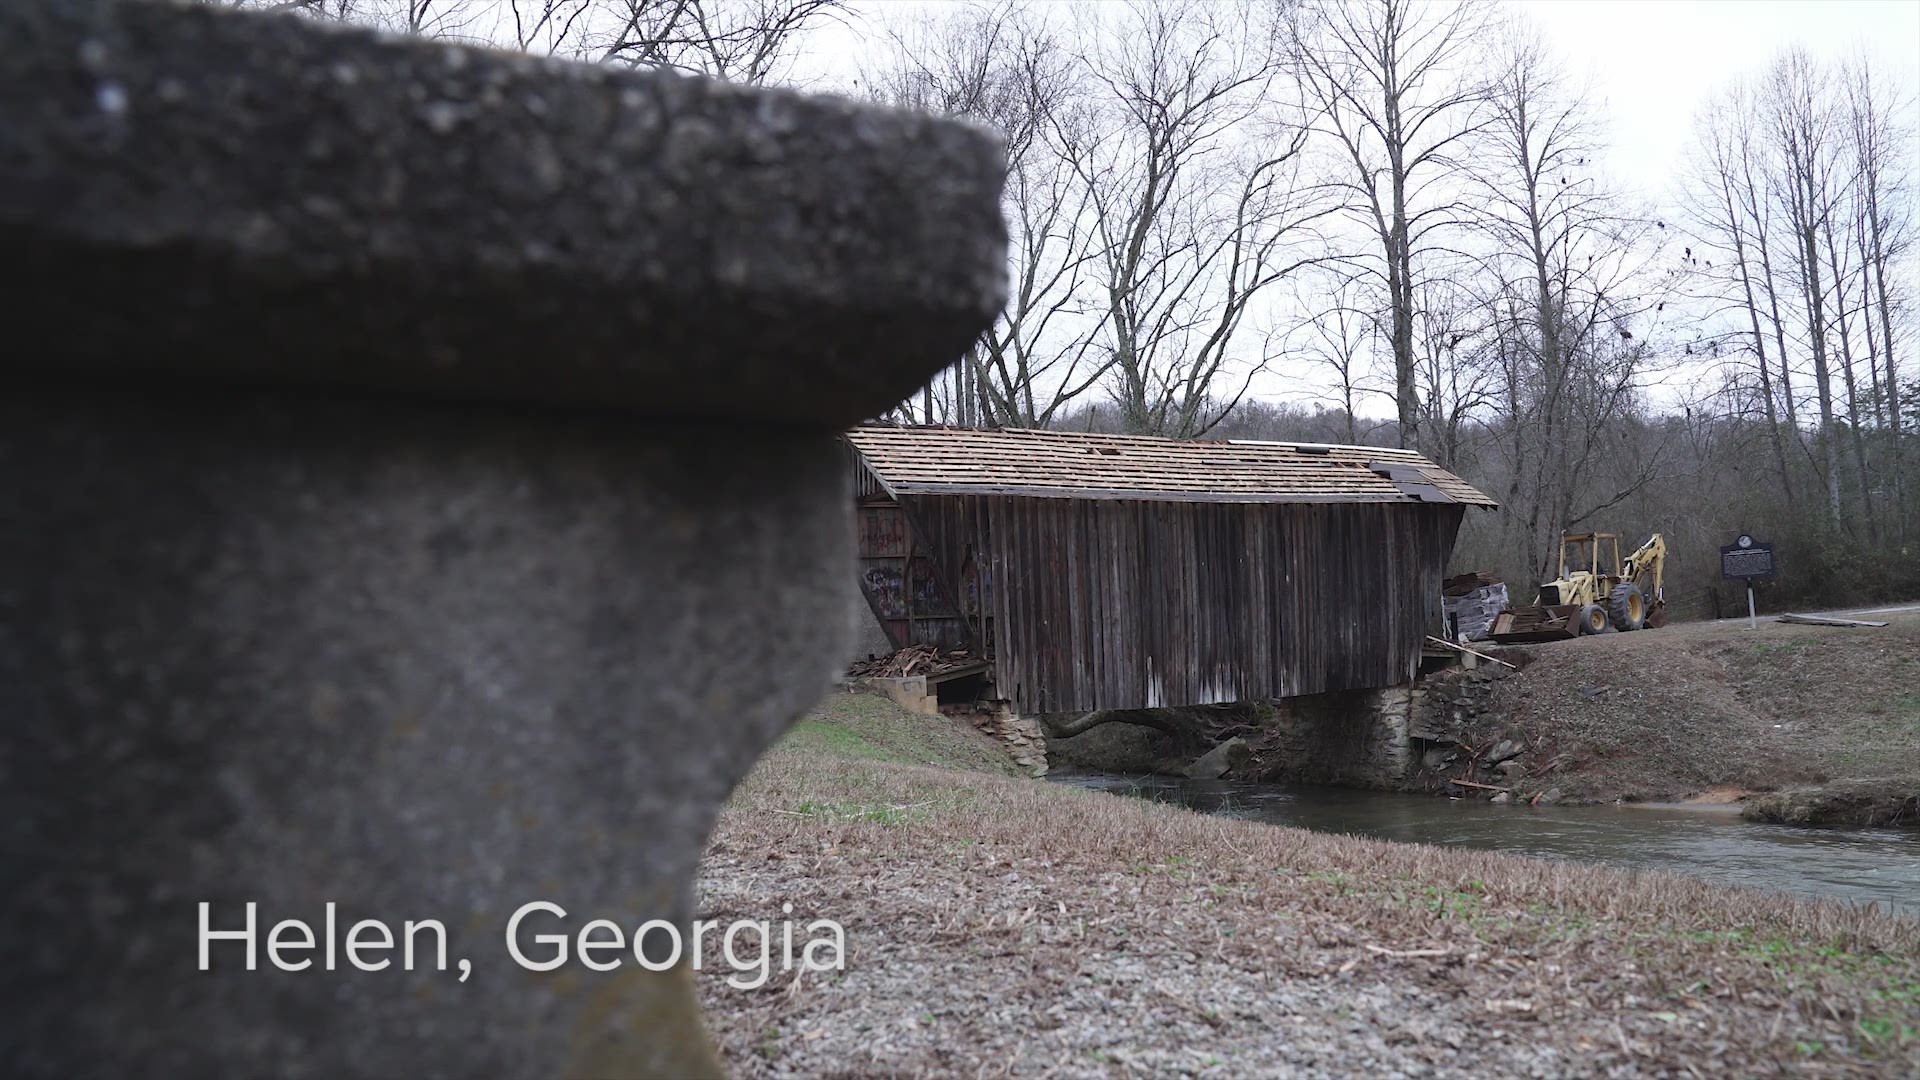 There's a mystery rising from the water in Helen, Georgia. Locals say don't walk this bridge... unless you're ready to face whatever it is calling out after dark. We're going ghost hunting.